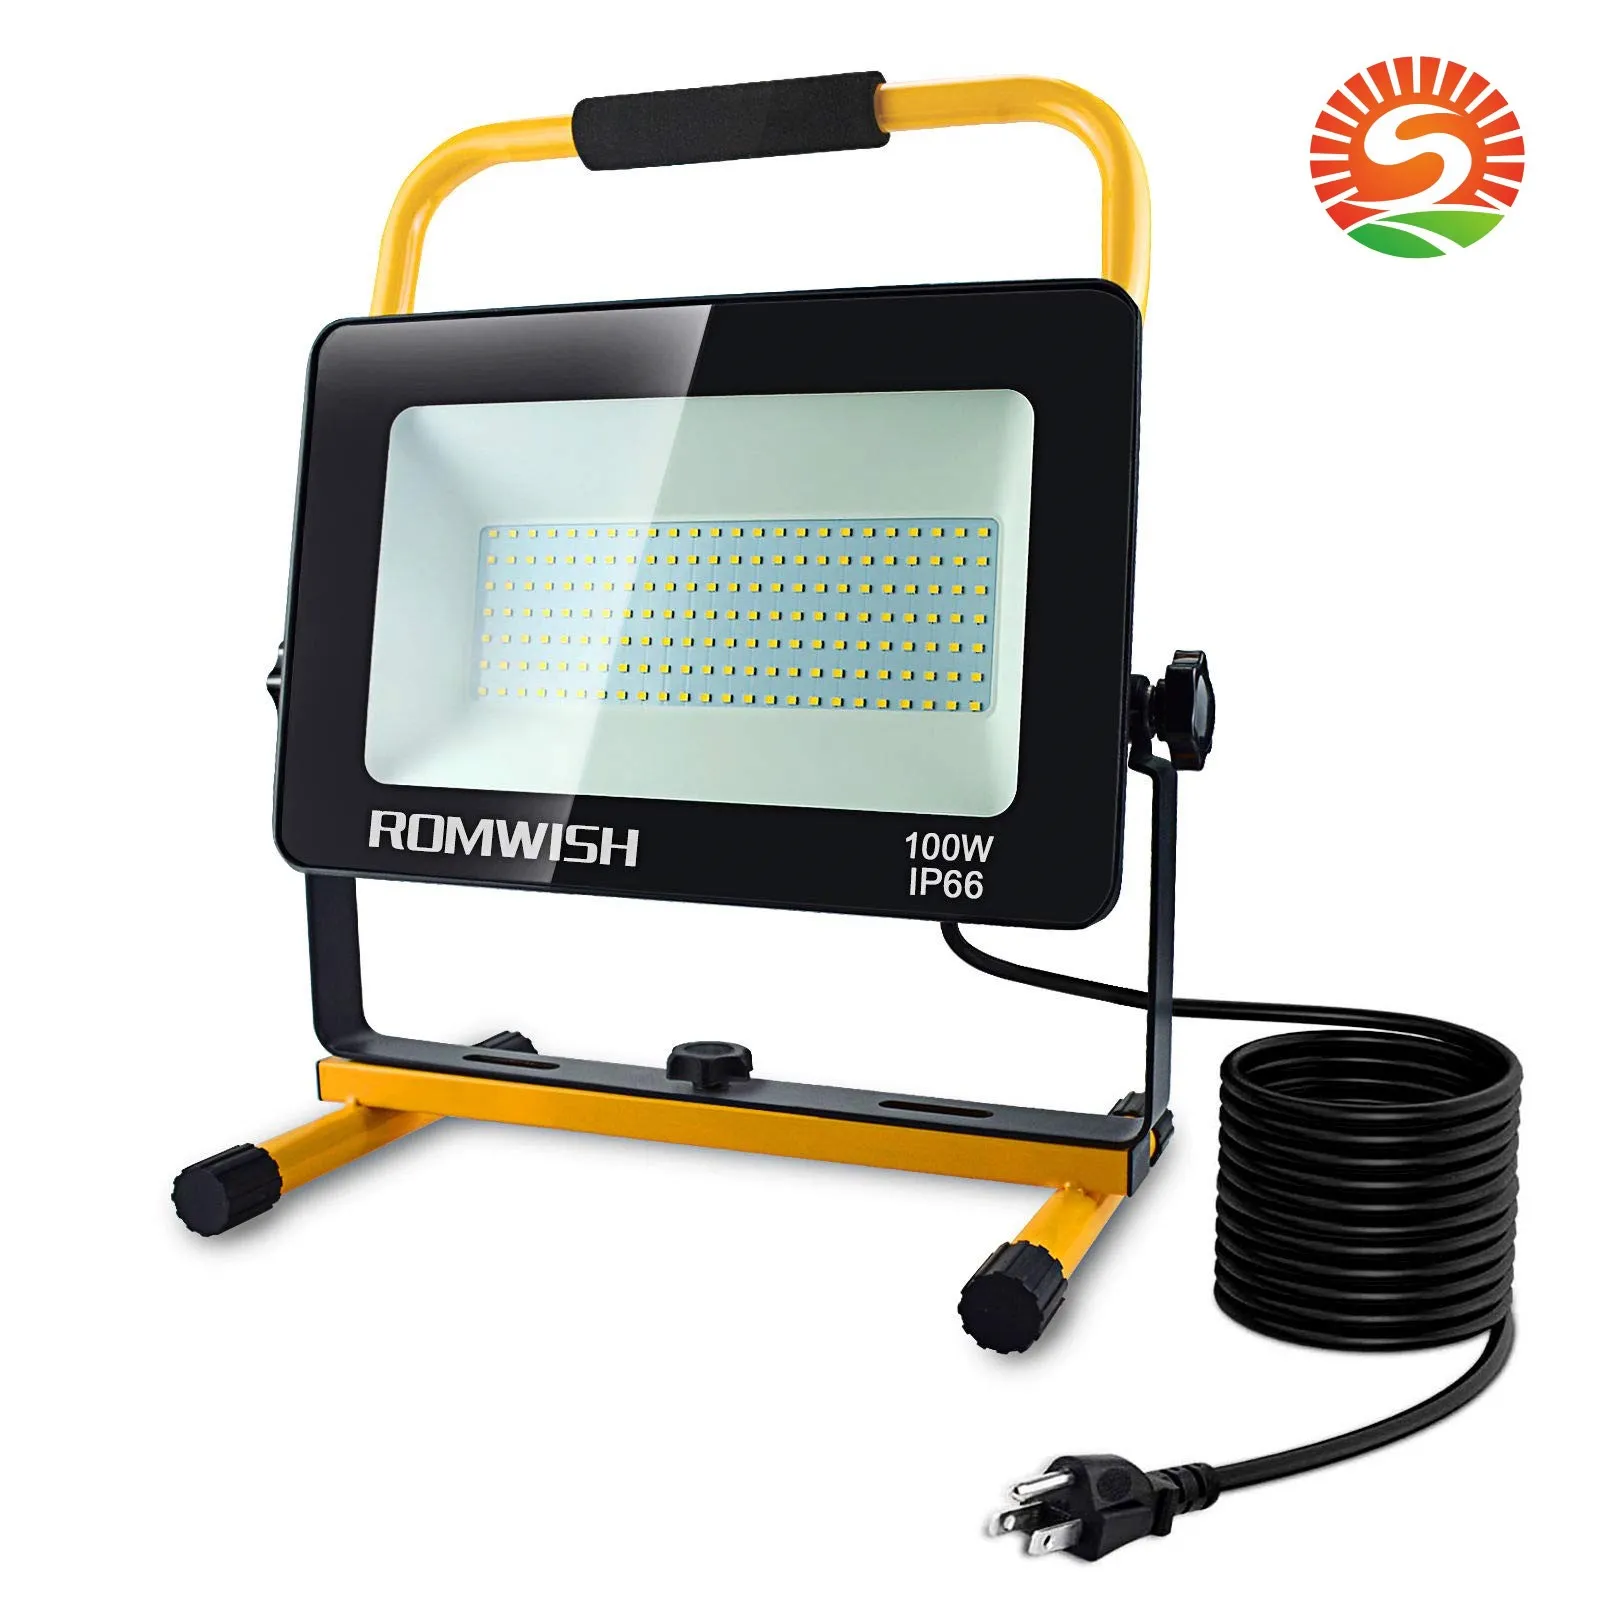 CNSUNWAY 100W LED Floodlight 10000LM Super Bright Work Light 2 Brightness Modes IP66 Waterproof 16.4FT Power Cord 5000K Daylight Portable Worklights with Stand